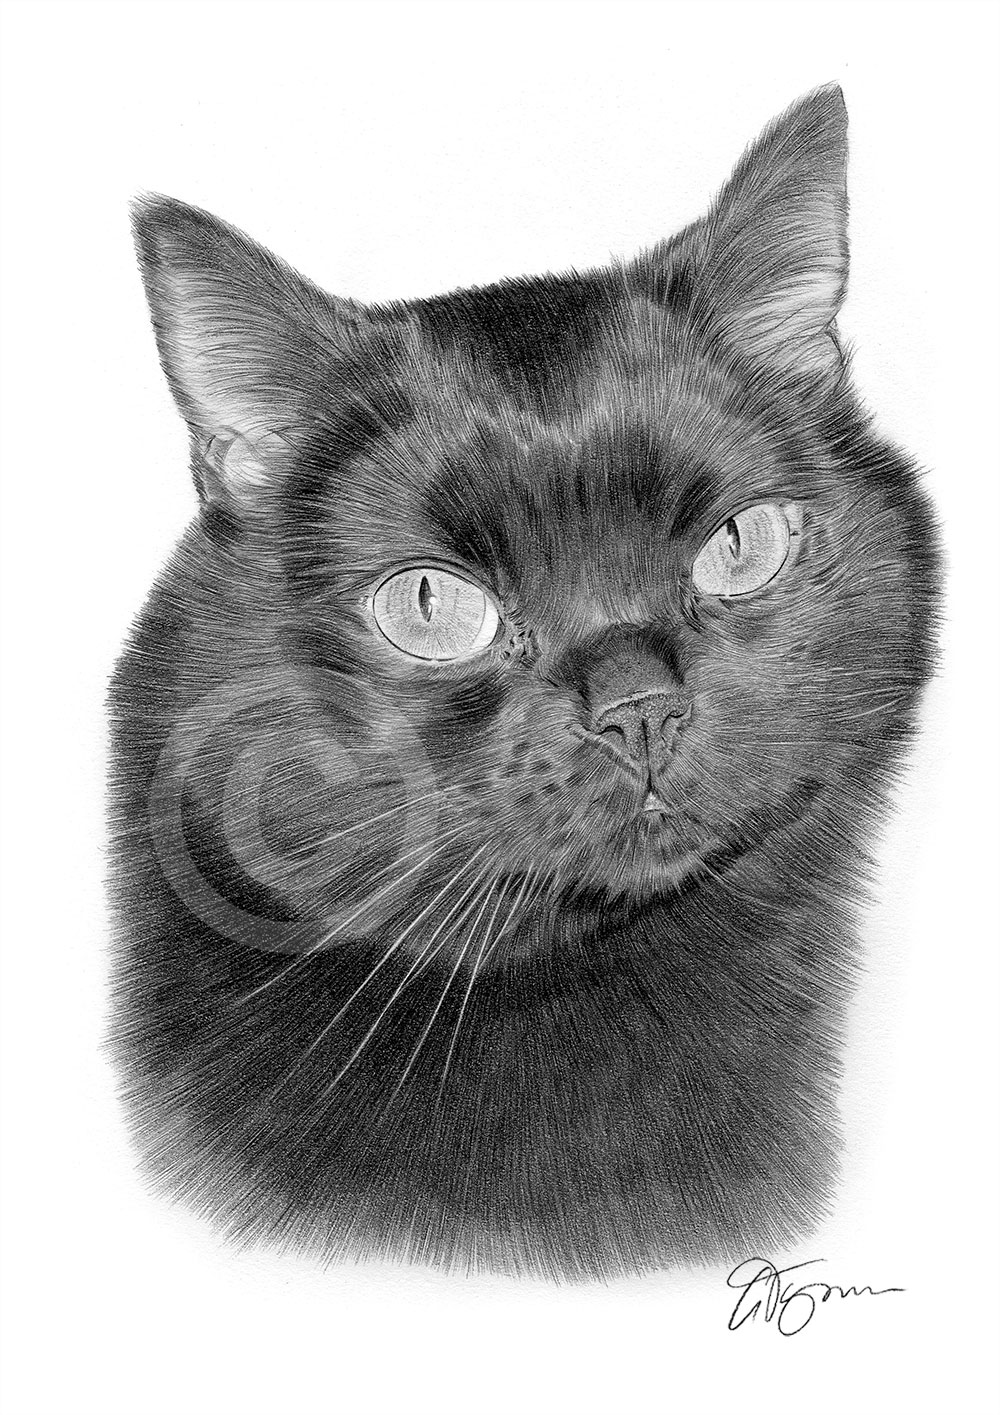 Pencil drawing of a black cat by UK artist Gary Tymon